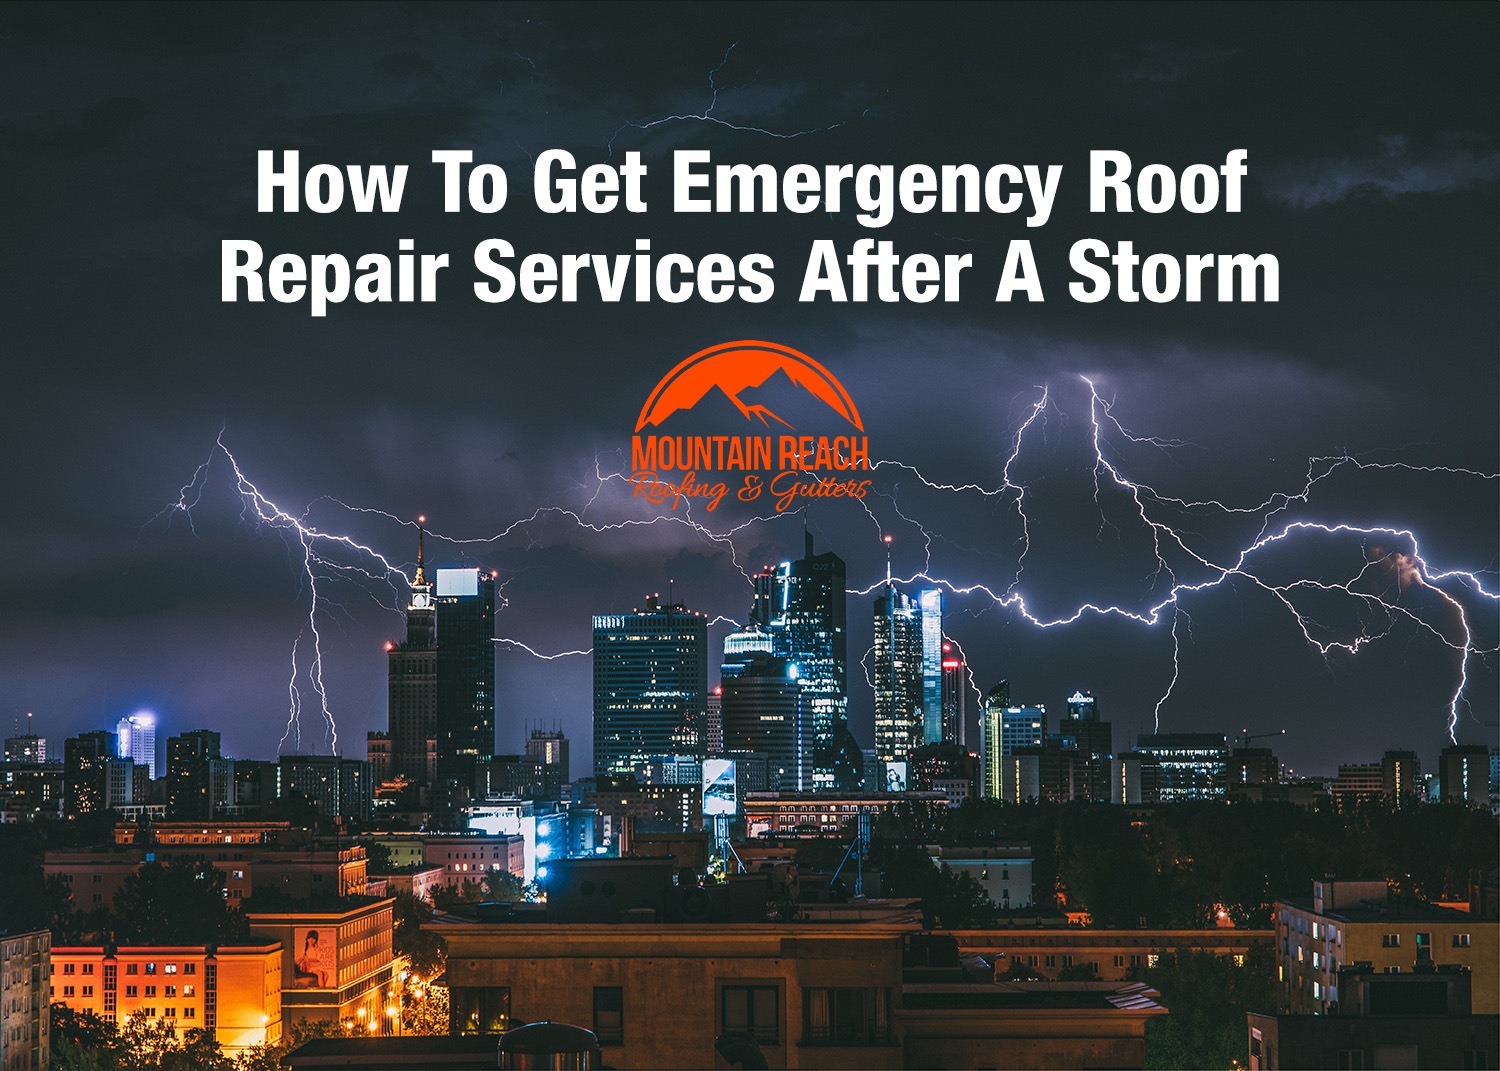 How To Get Emergency Roof Repair Services After A Storm